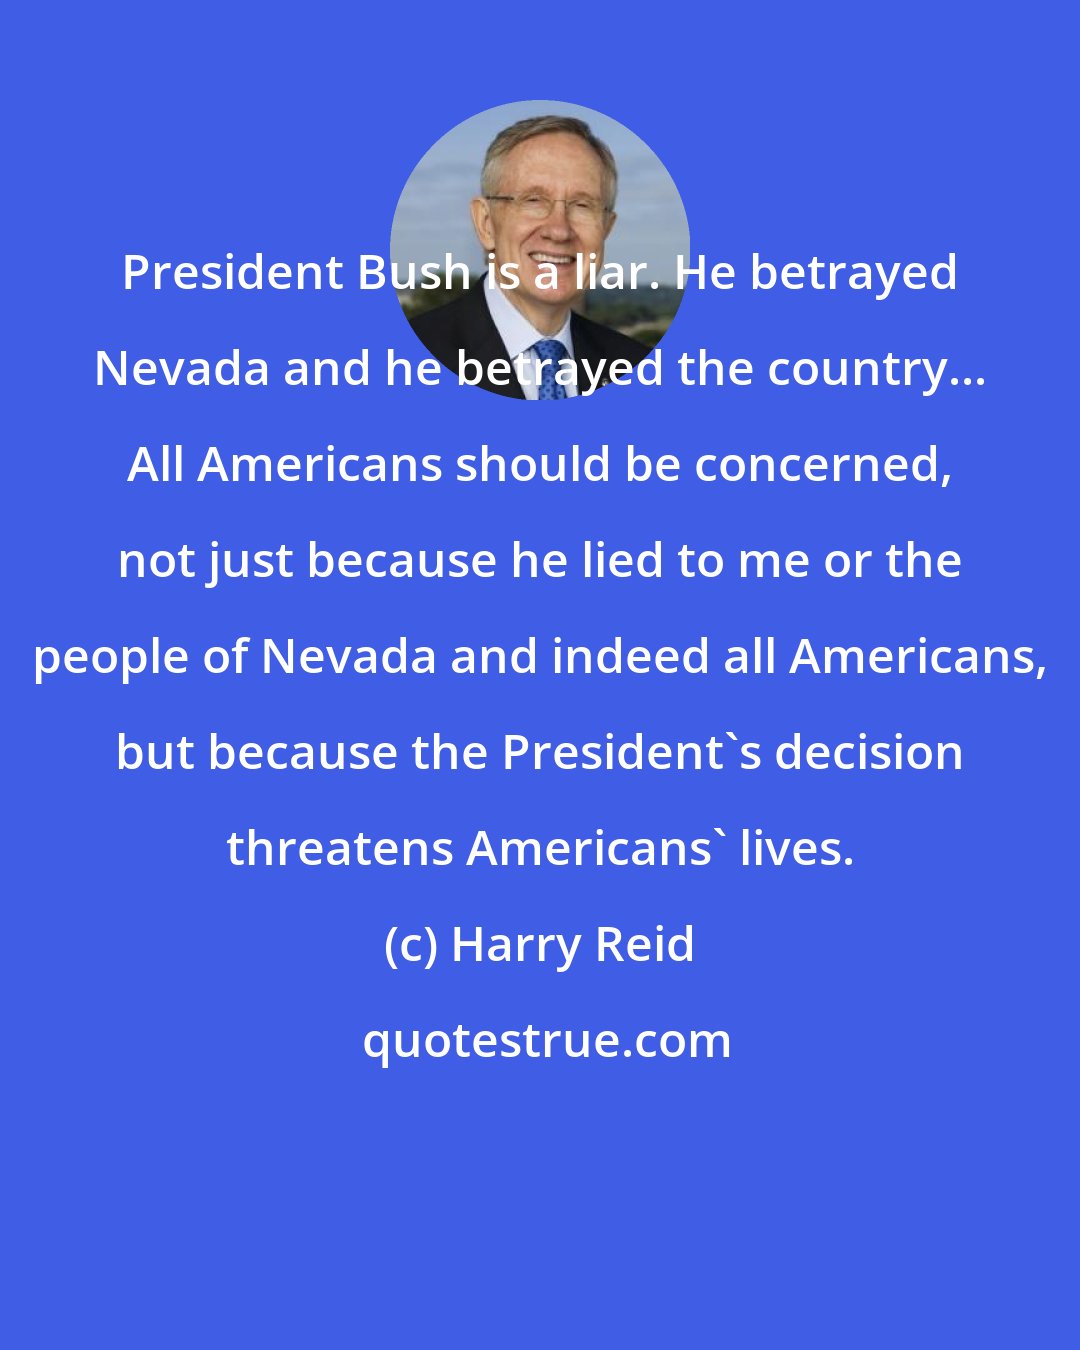 Harry Reid: President Bush is a liar. He betrayed Nevada and he betrayed the country... All Americans should be concerned, not just because he lied to me or the people of Nevada and indeed all Americans, but because the President's decision threatens Americans' lives.